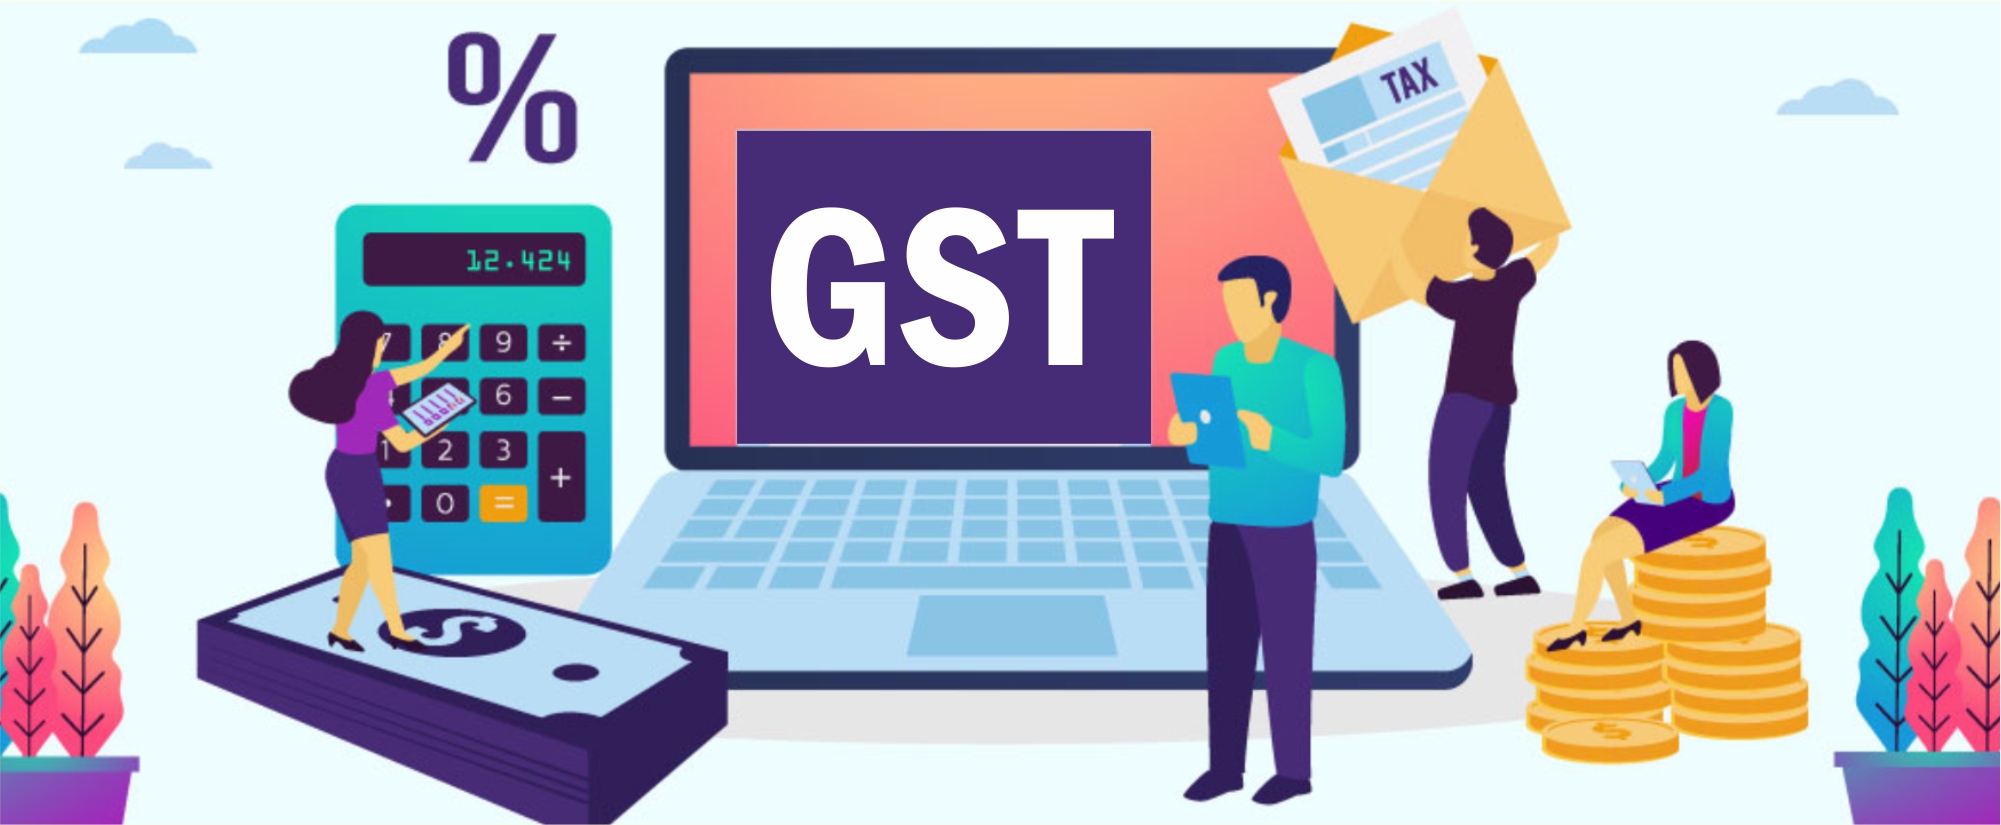 GST Council to meet before mid-November; GoM reports on appellate tribunal, tax casinos on agenda